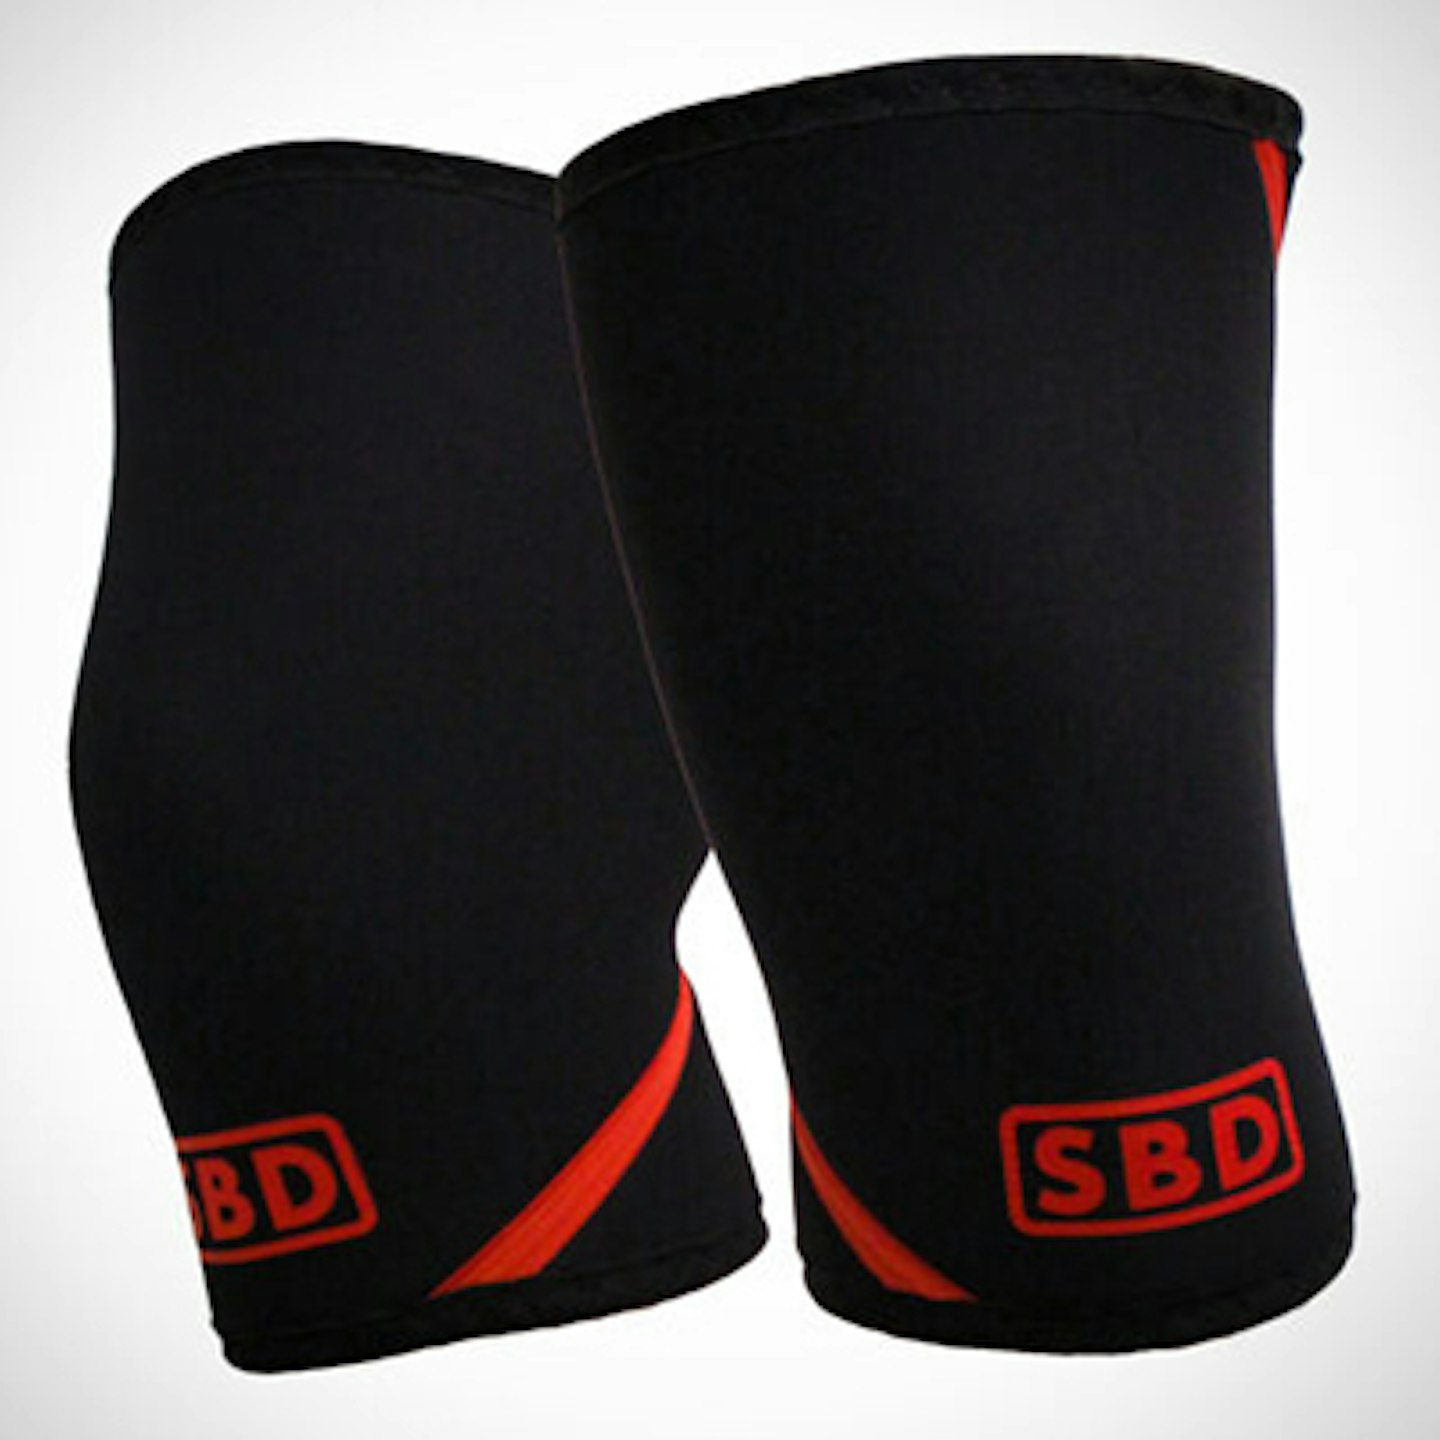 Best knee sleeves For weightlifting, CrossFit and more